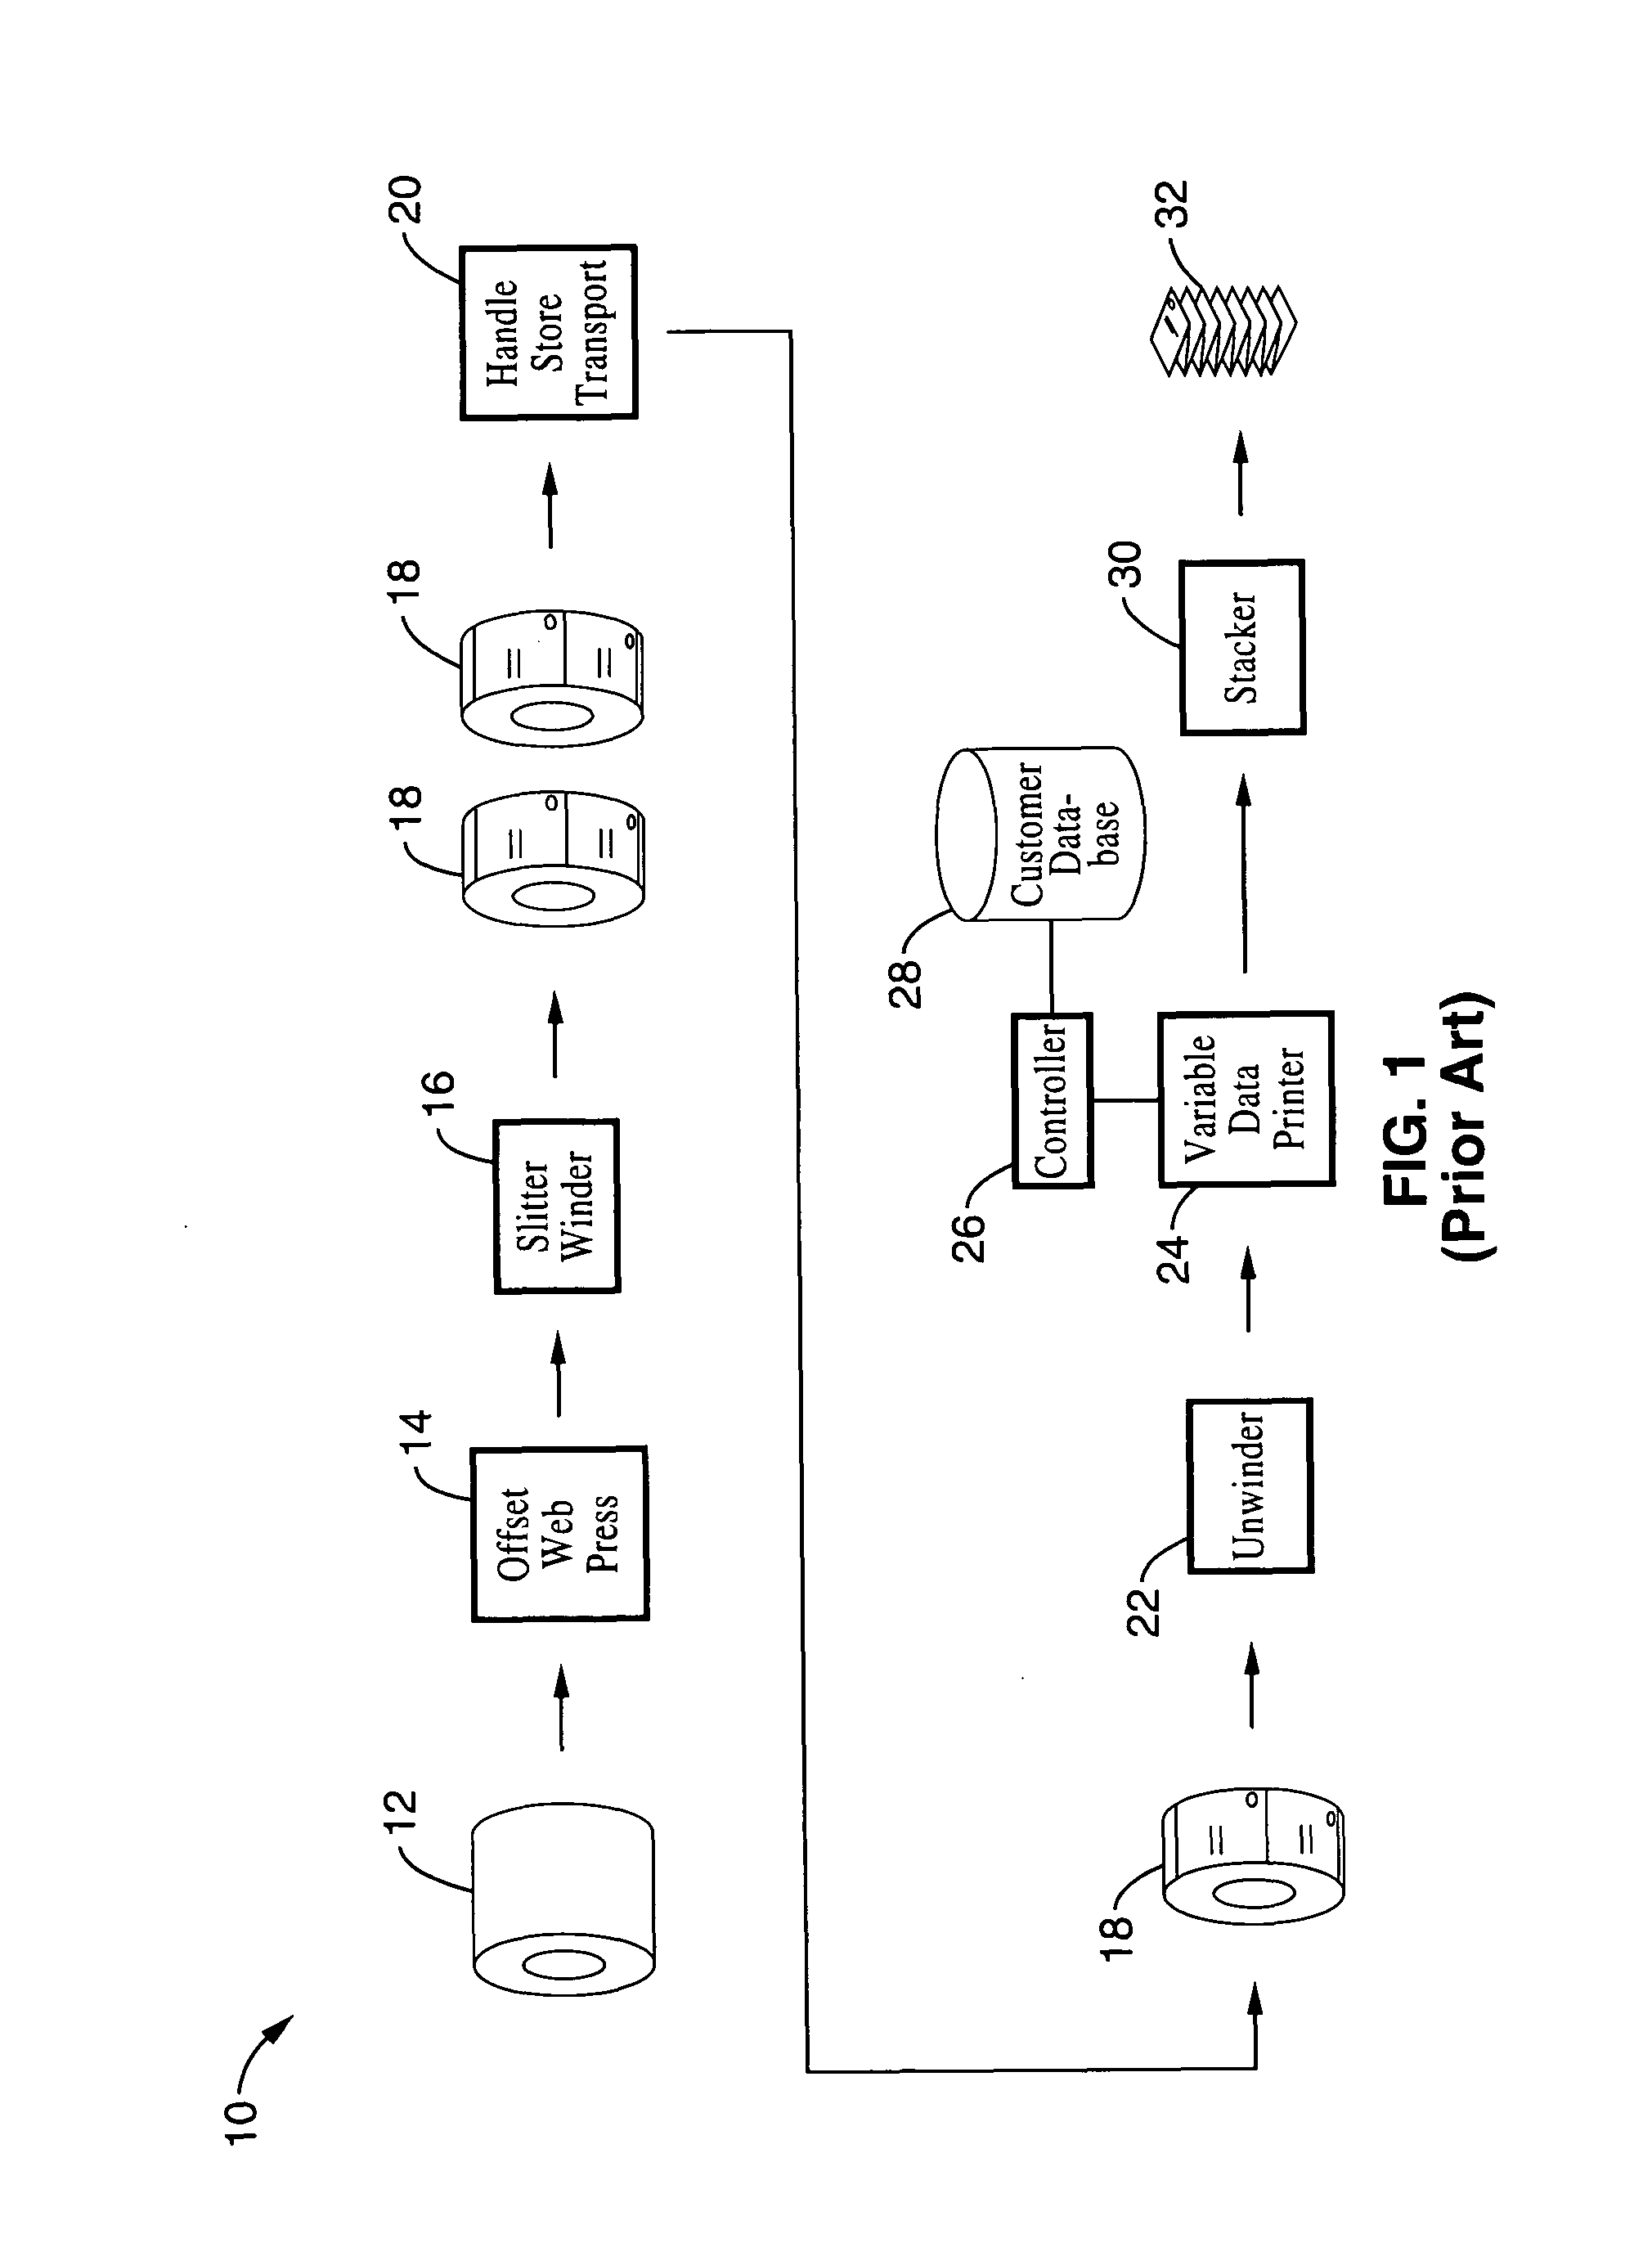 Apparatus and method for high speed printing of form and variable data